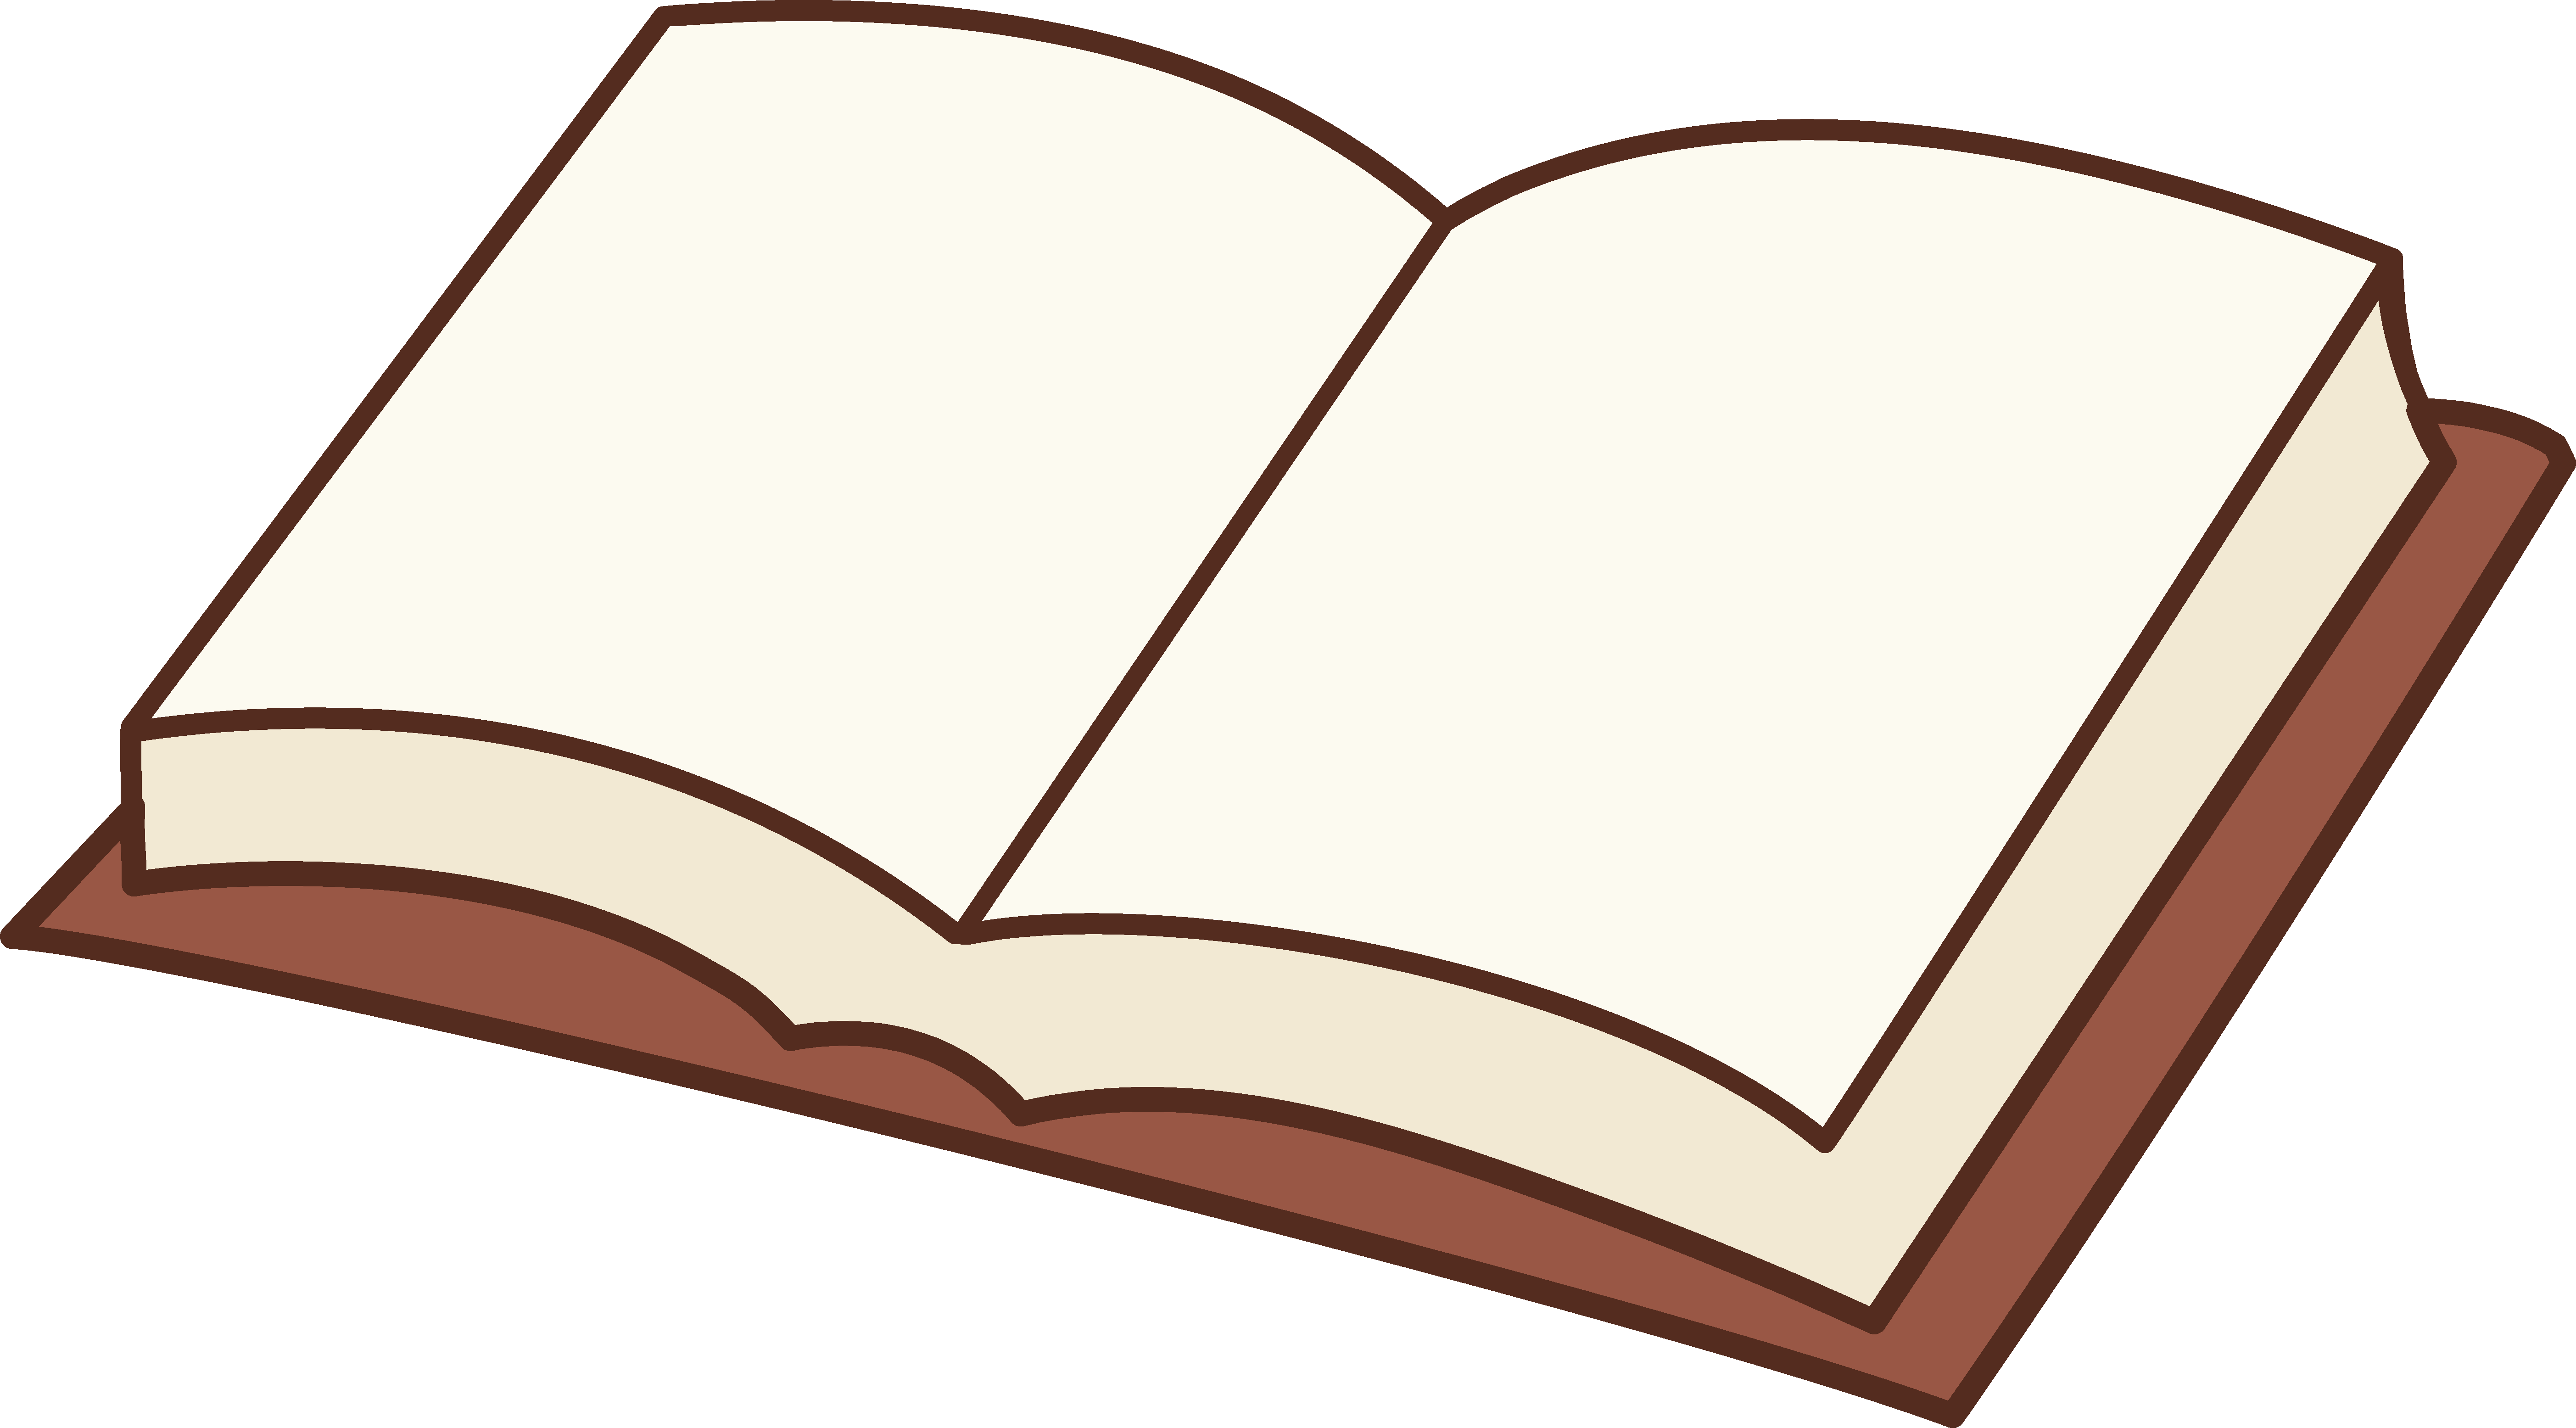 spine clipart open book